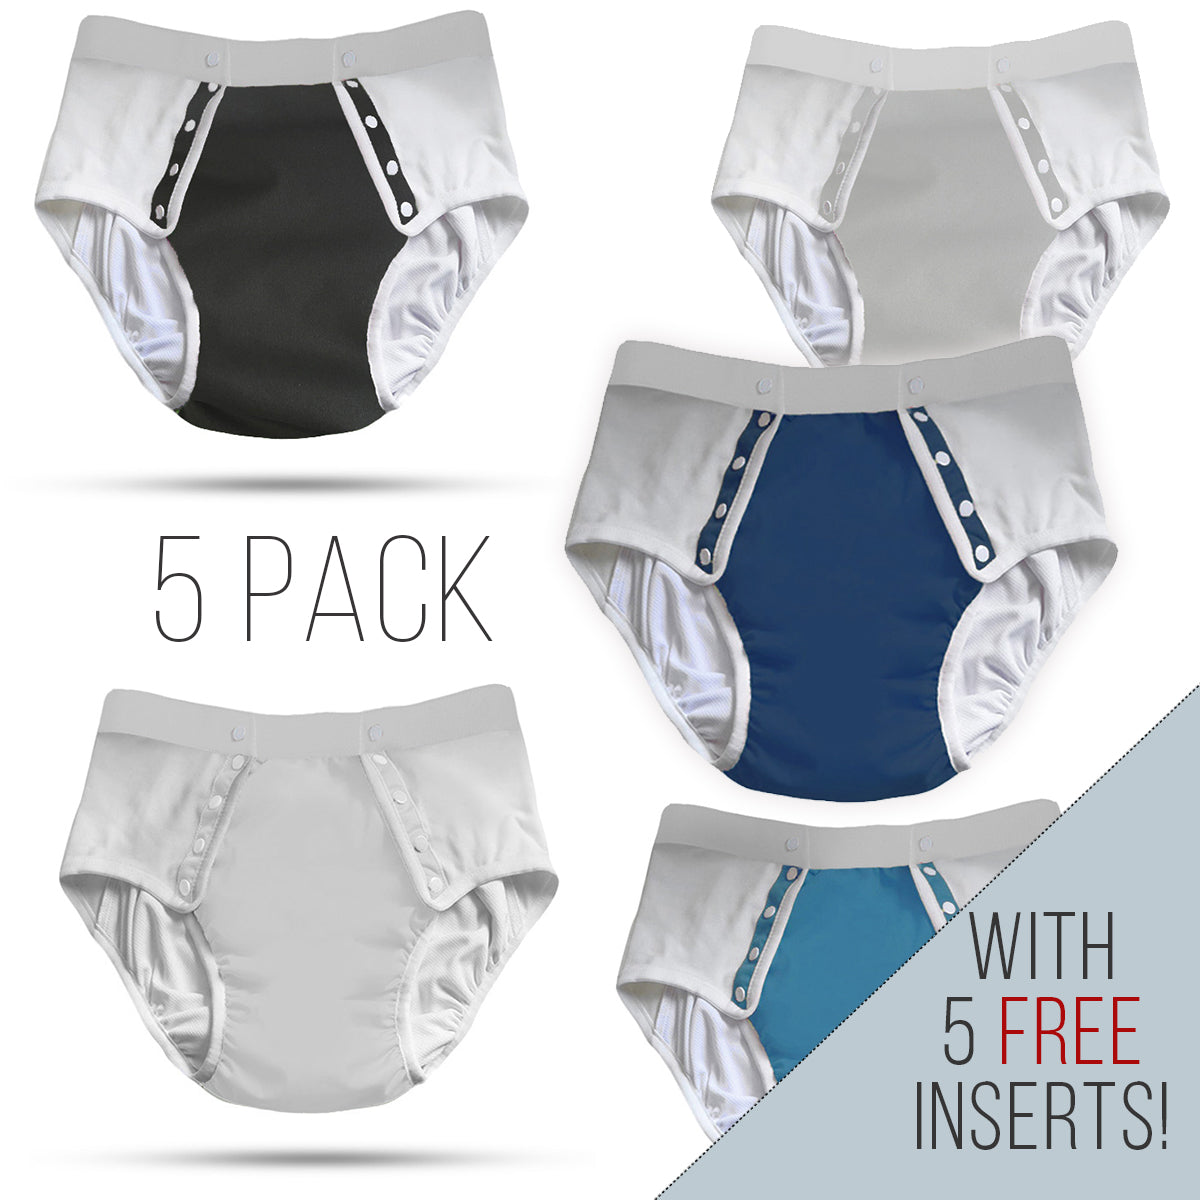 Incontinence Underwear for Men 2 Pack Washable Nepal